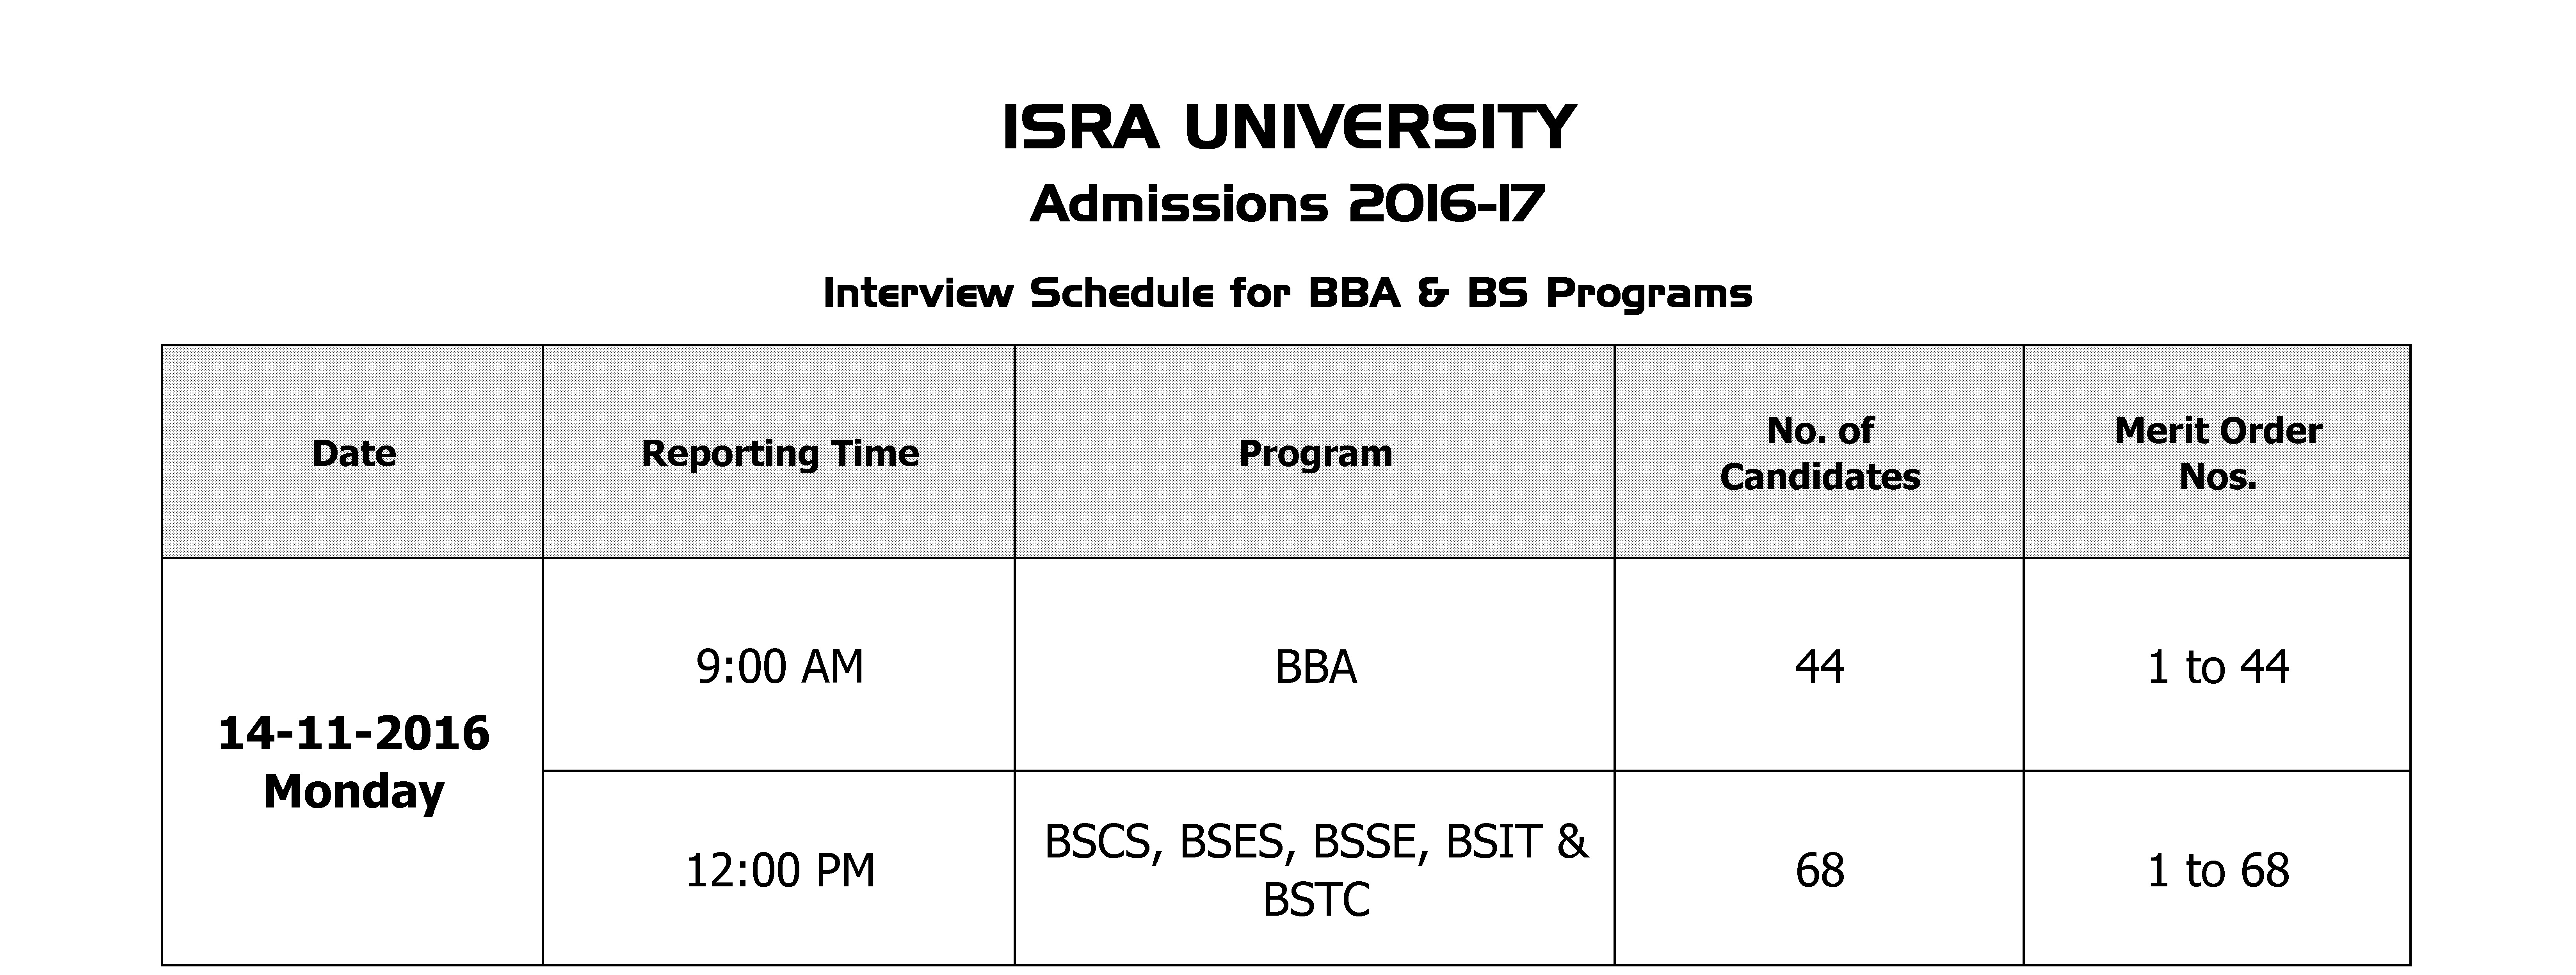 interview-schedule-for-bba-bs-programs